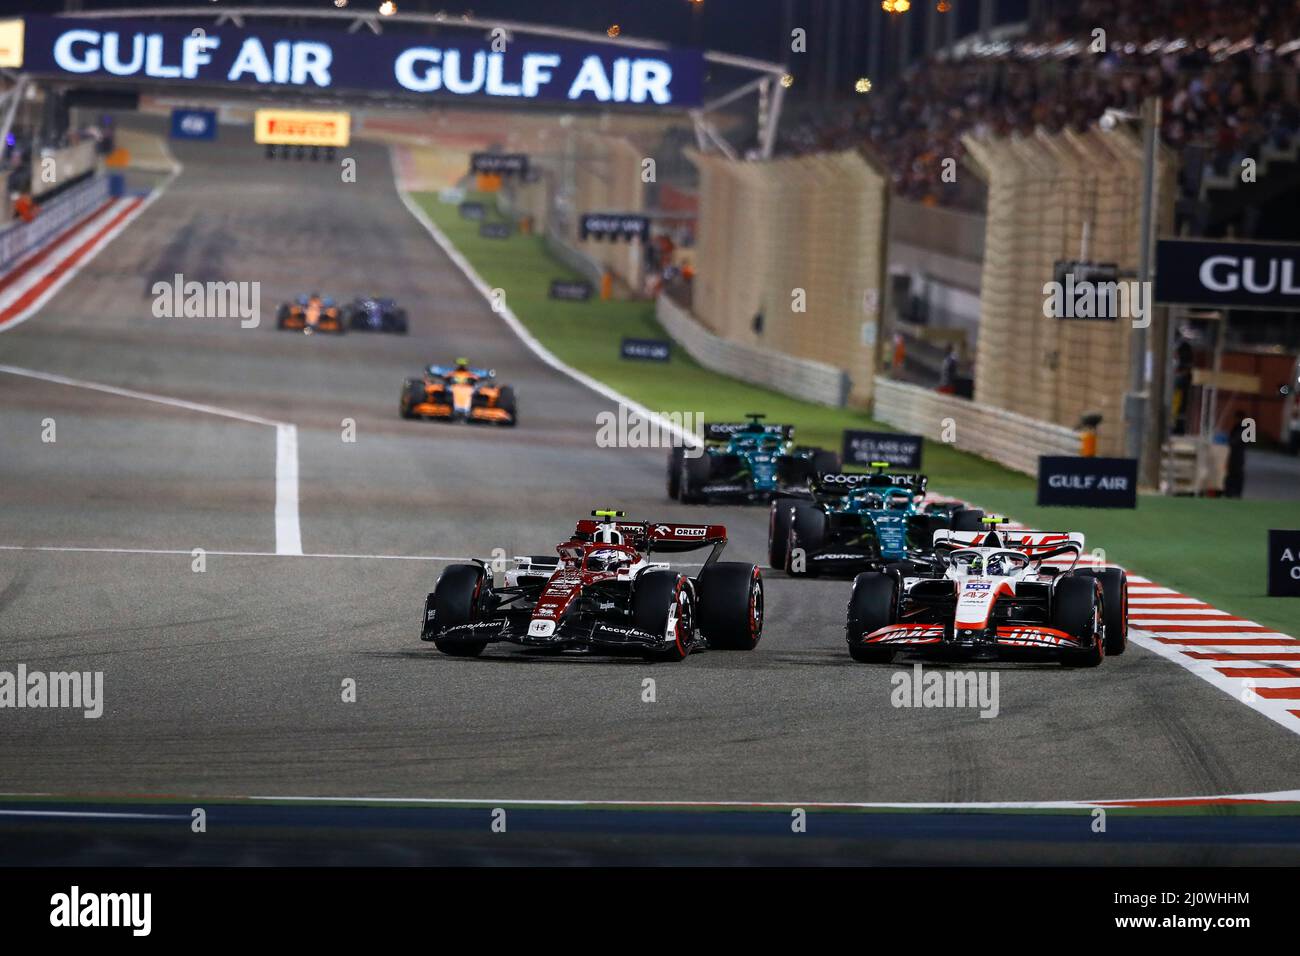 (220321) -- SAKHIR, March 21, 2022 (Xinhua) -- Alfa Romeo's Chinese driver Zhou Guanyu (fromt L) competes during the Bahrain Formula One Grand Prix at the Bahrain International Circuit in the city of Sakhir on March 20, 2022. (DPPI/Handout via Xinhua) Stock Photo